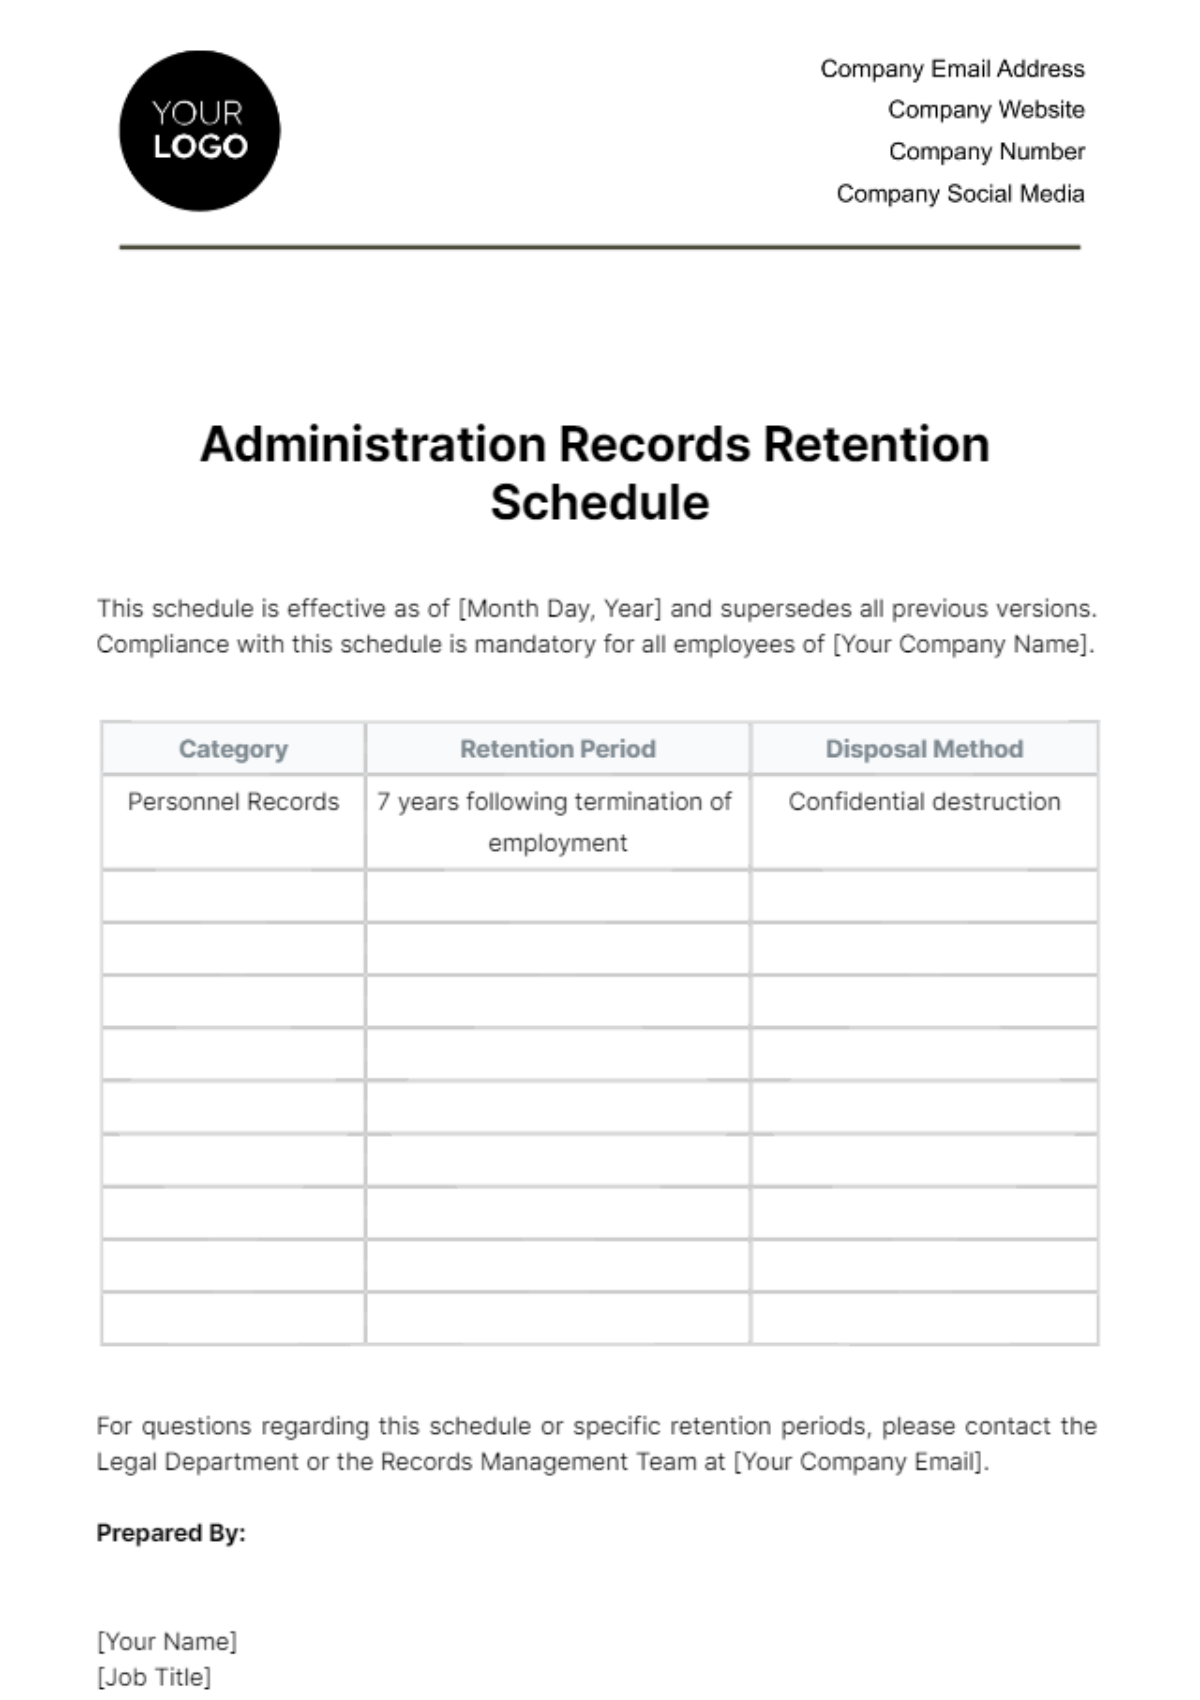 Free Administration Records Retention Schedule Template